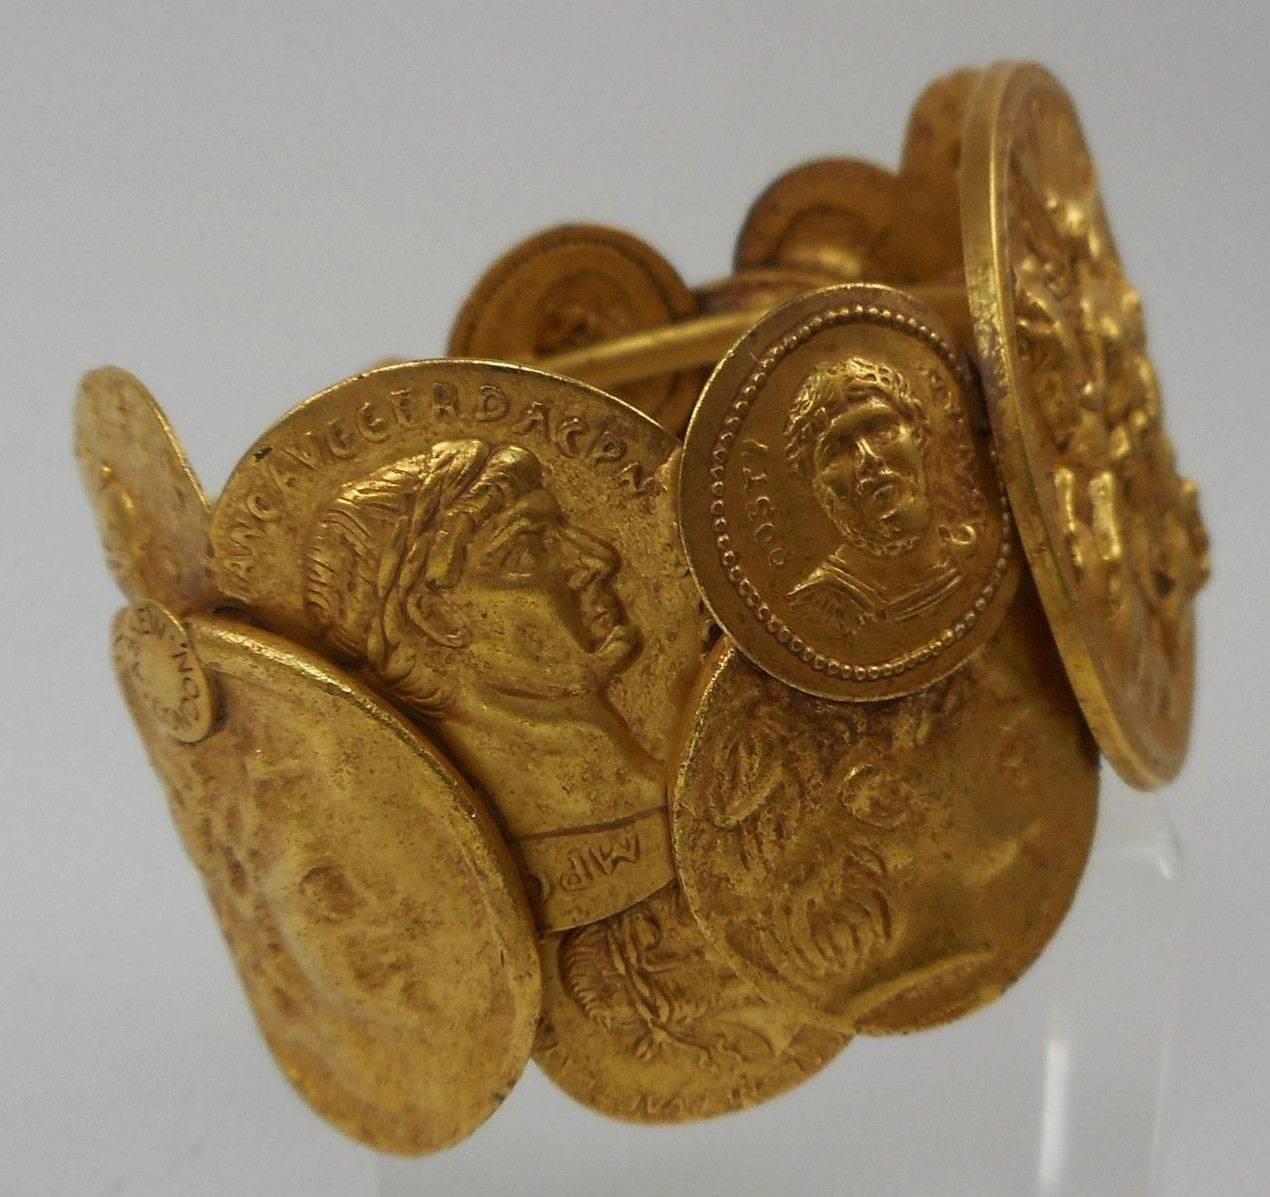 Askew London signed Antiqued Gold Plated Hinged Bracelet featuring Gold plated Brass Roman style Coins. Approx. 1.75'' Wide. Classic, Stylish, Beautiful and Fun to Wear! 
